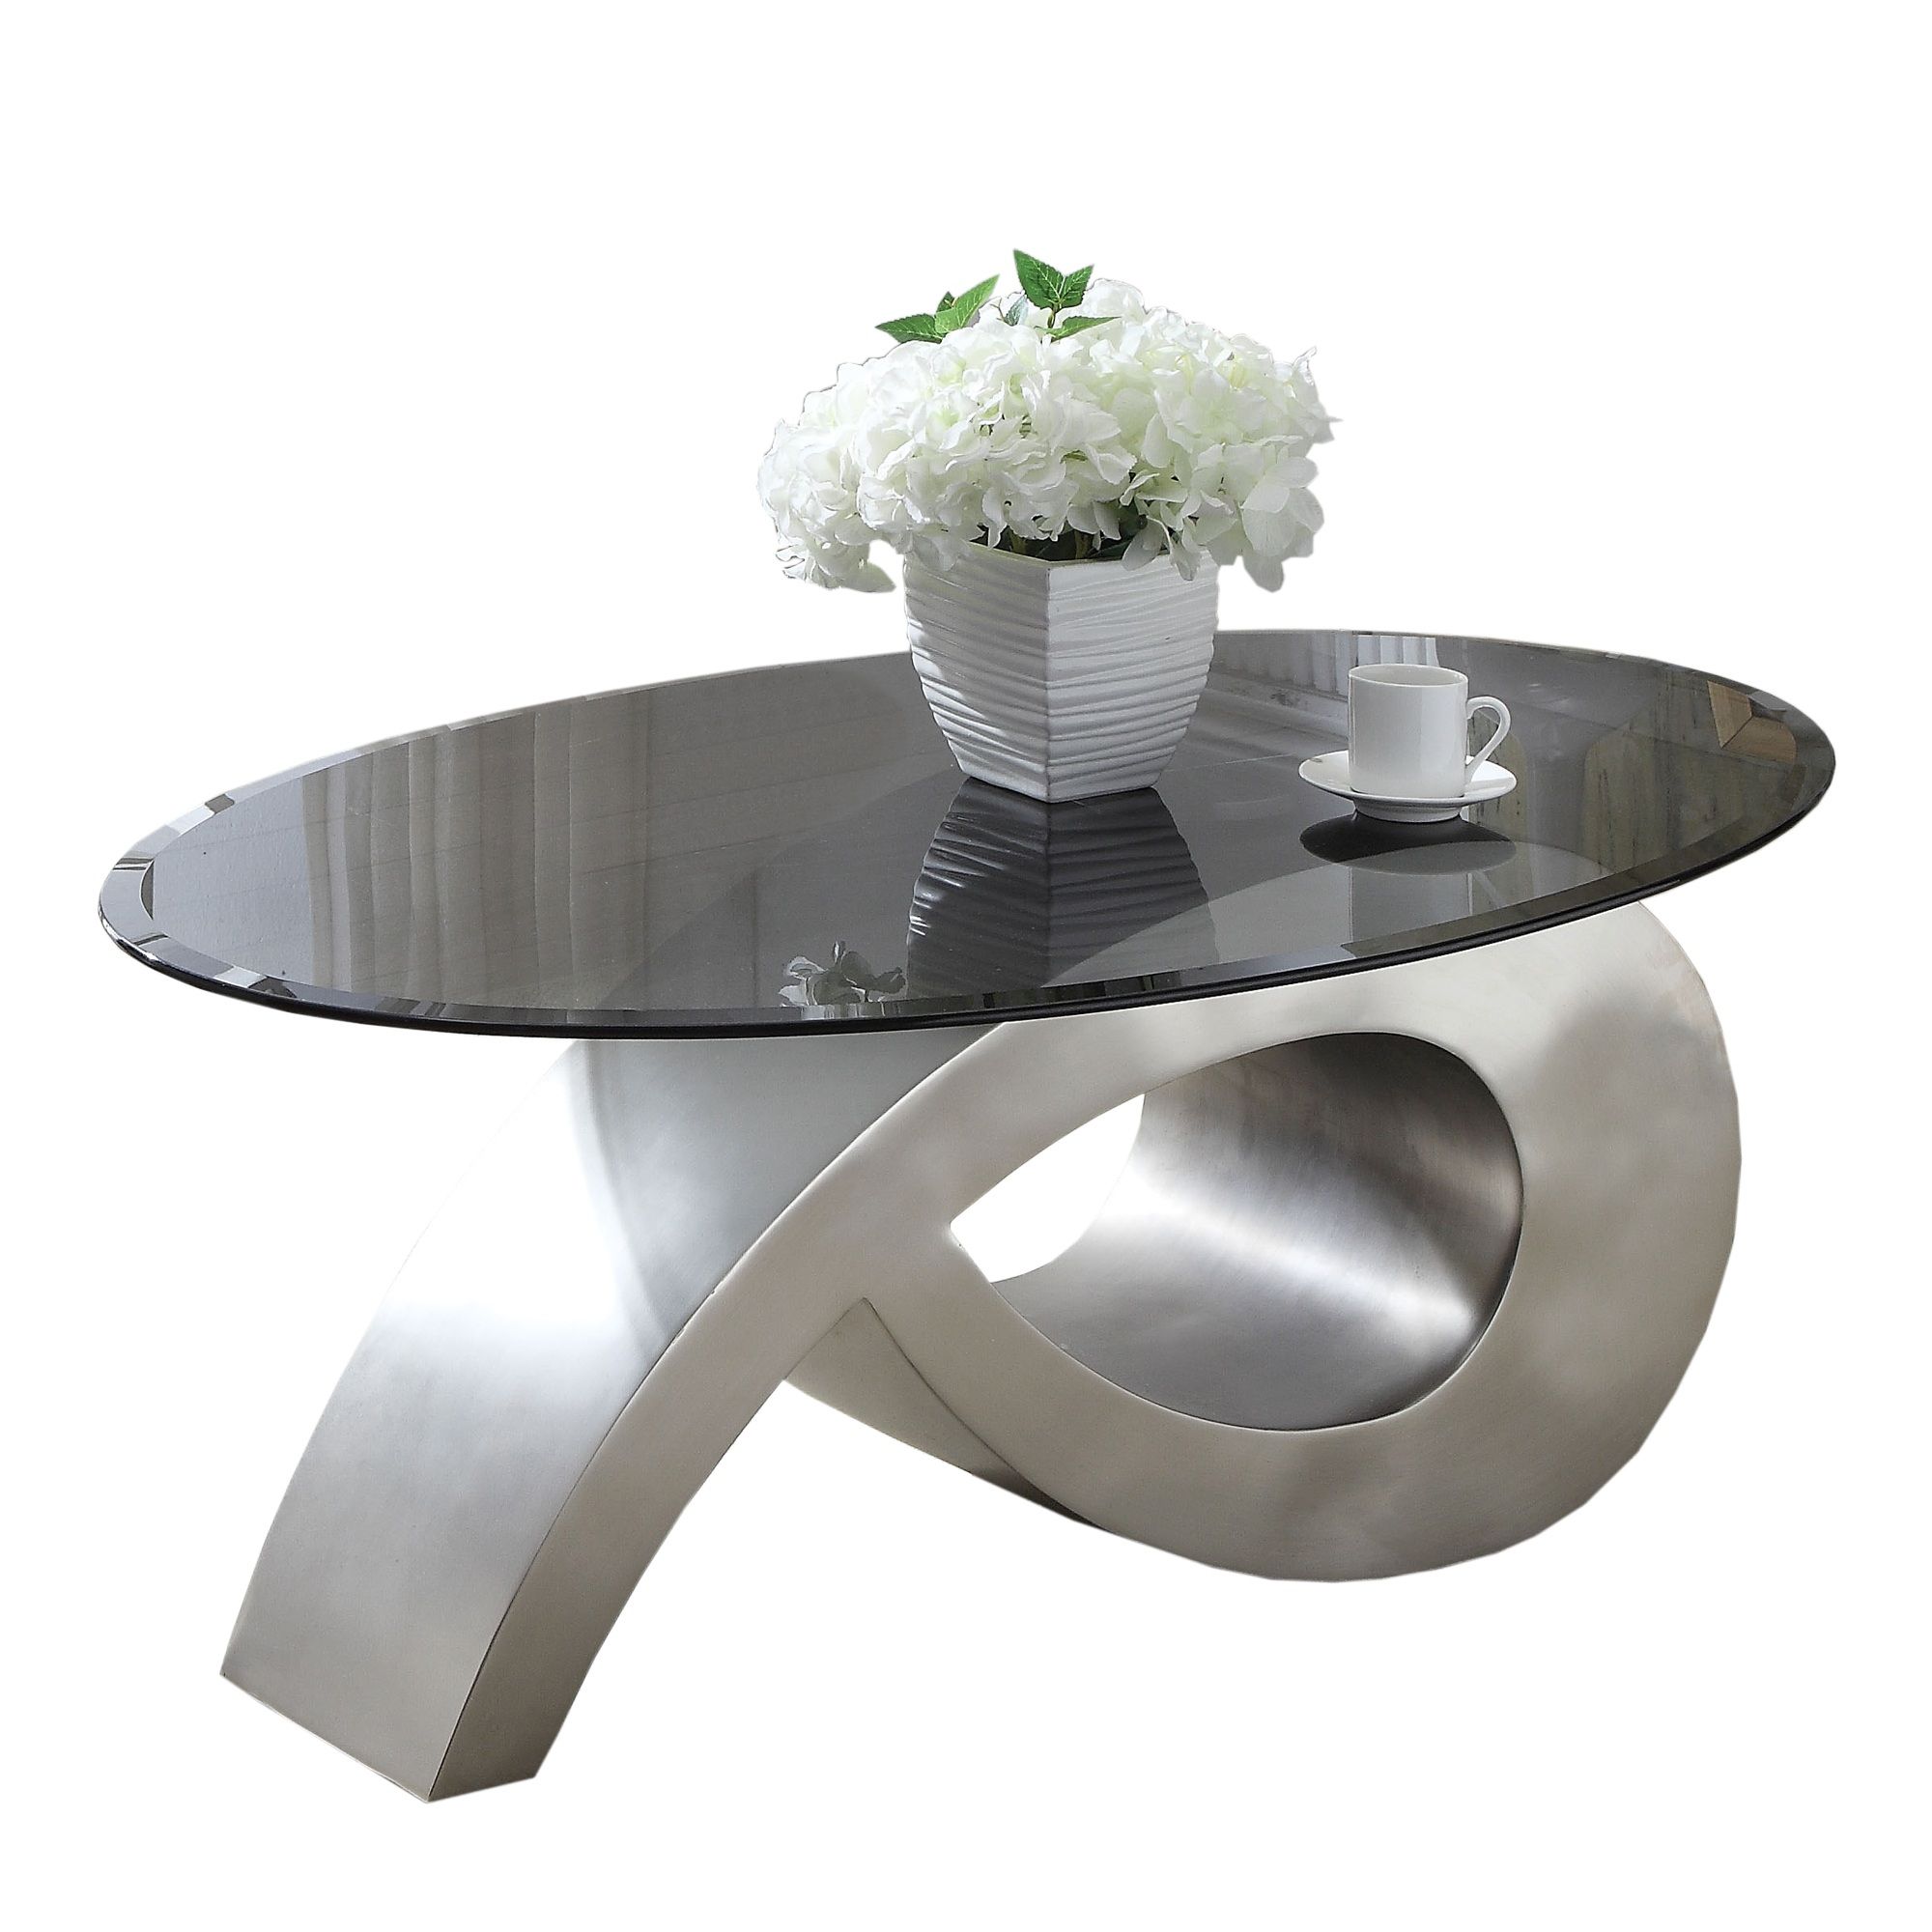 Oval Glass Coffee Table With Unique Metal Base, Black And Throughout Silver Coffee Tables (View 12 of 15)